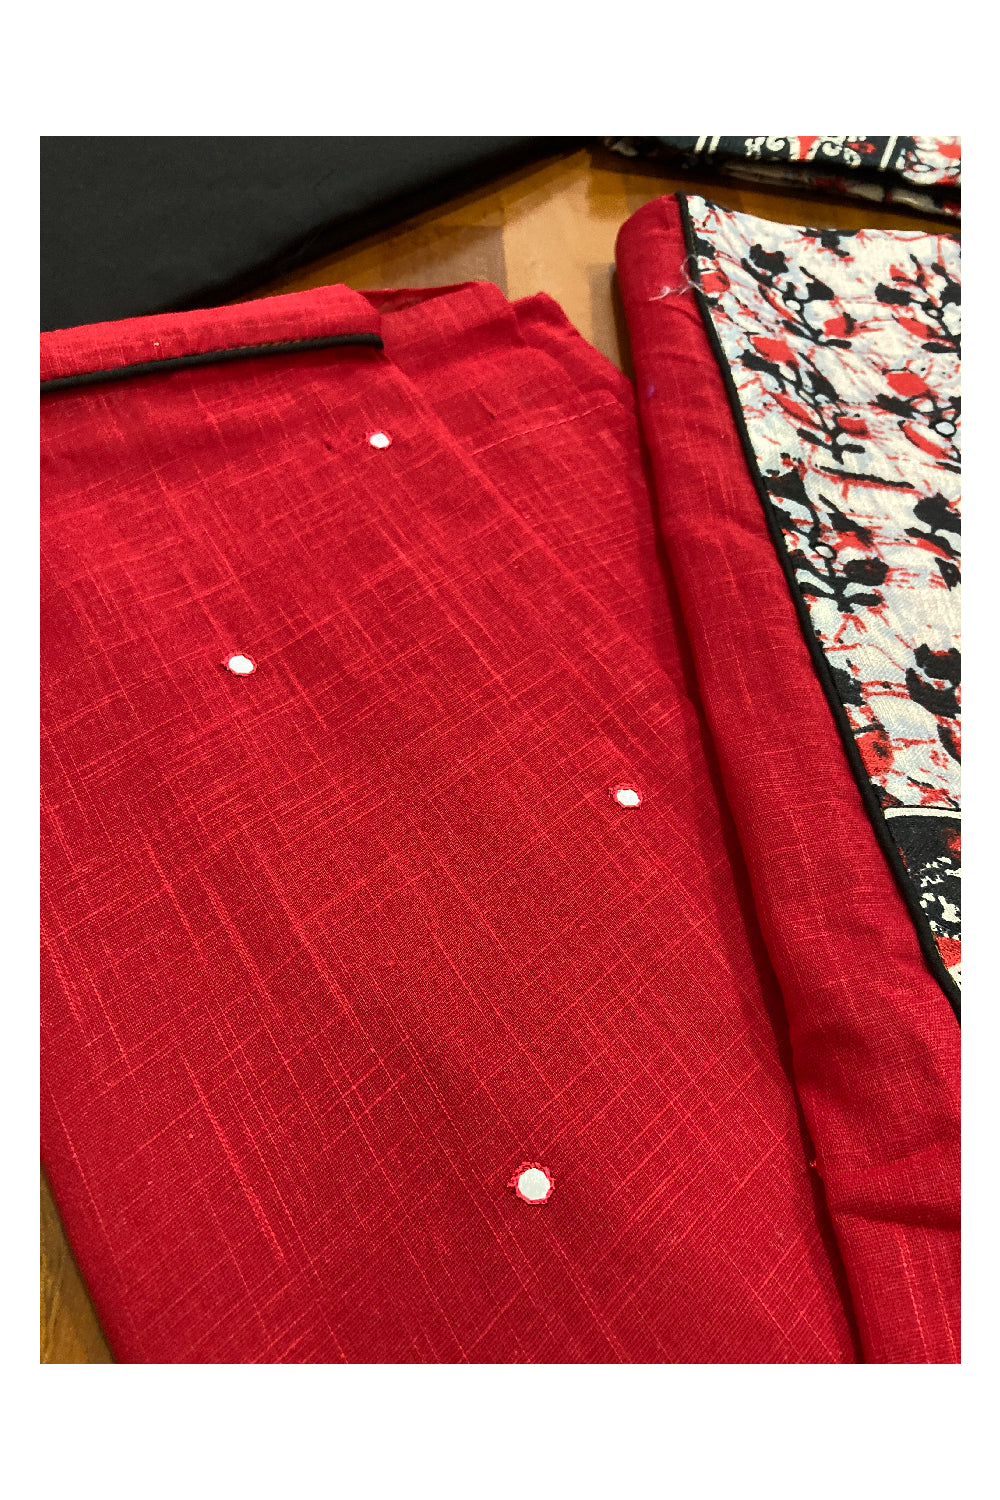 Southloom™ Cotton Churidar Salwar Suit Material in Red and Printed Mirror Work on Yoke Portion